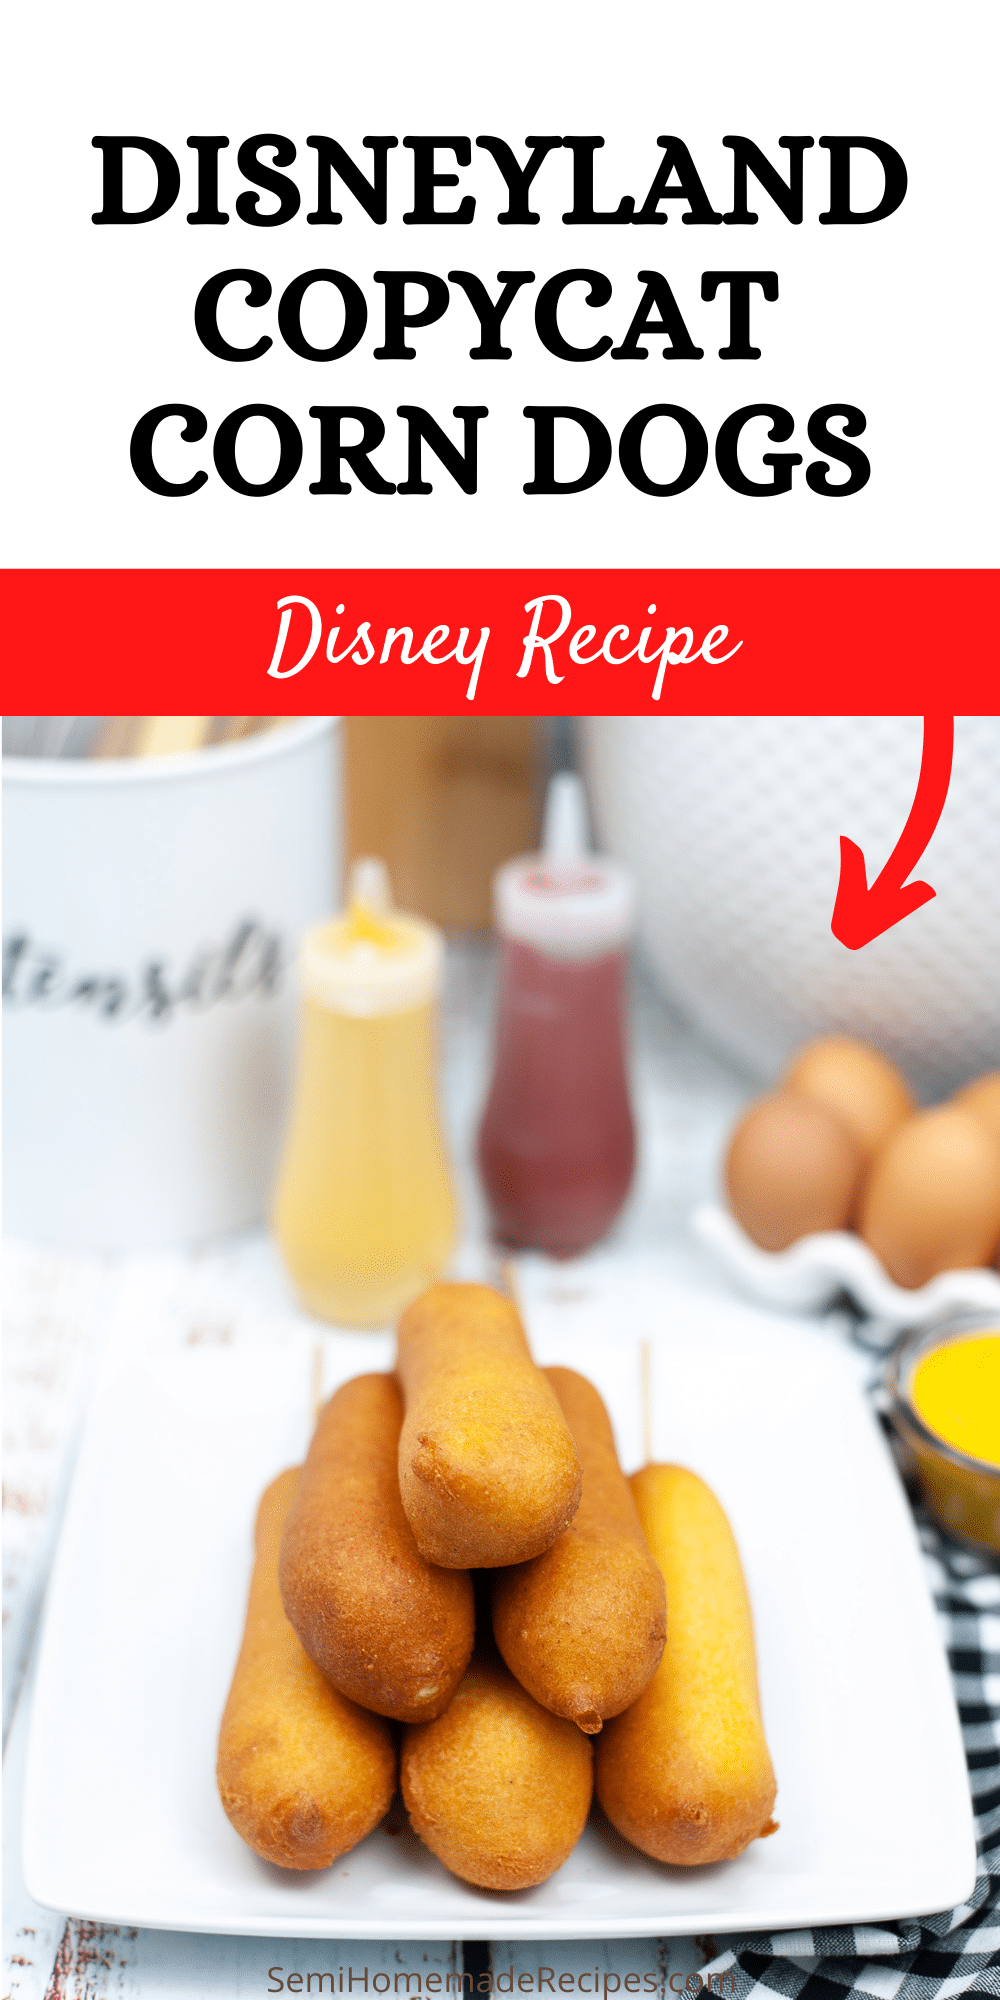 Fallen in love with Disneyland Corn Dogs? Wishing you would make it to Disneyland for the famous corn dogs? Make them at home with this great recipe for Disneyland Copycat Corn Dogs!

 via @bigbearswife